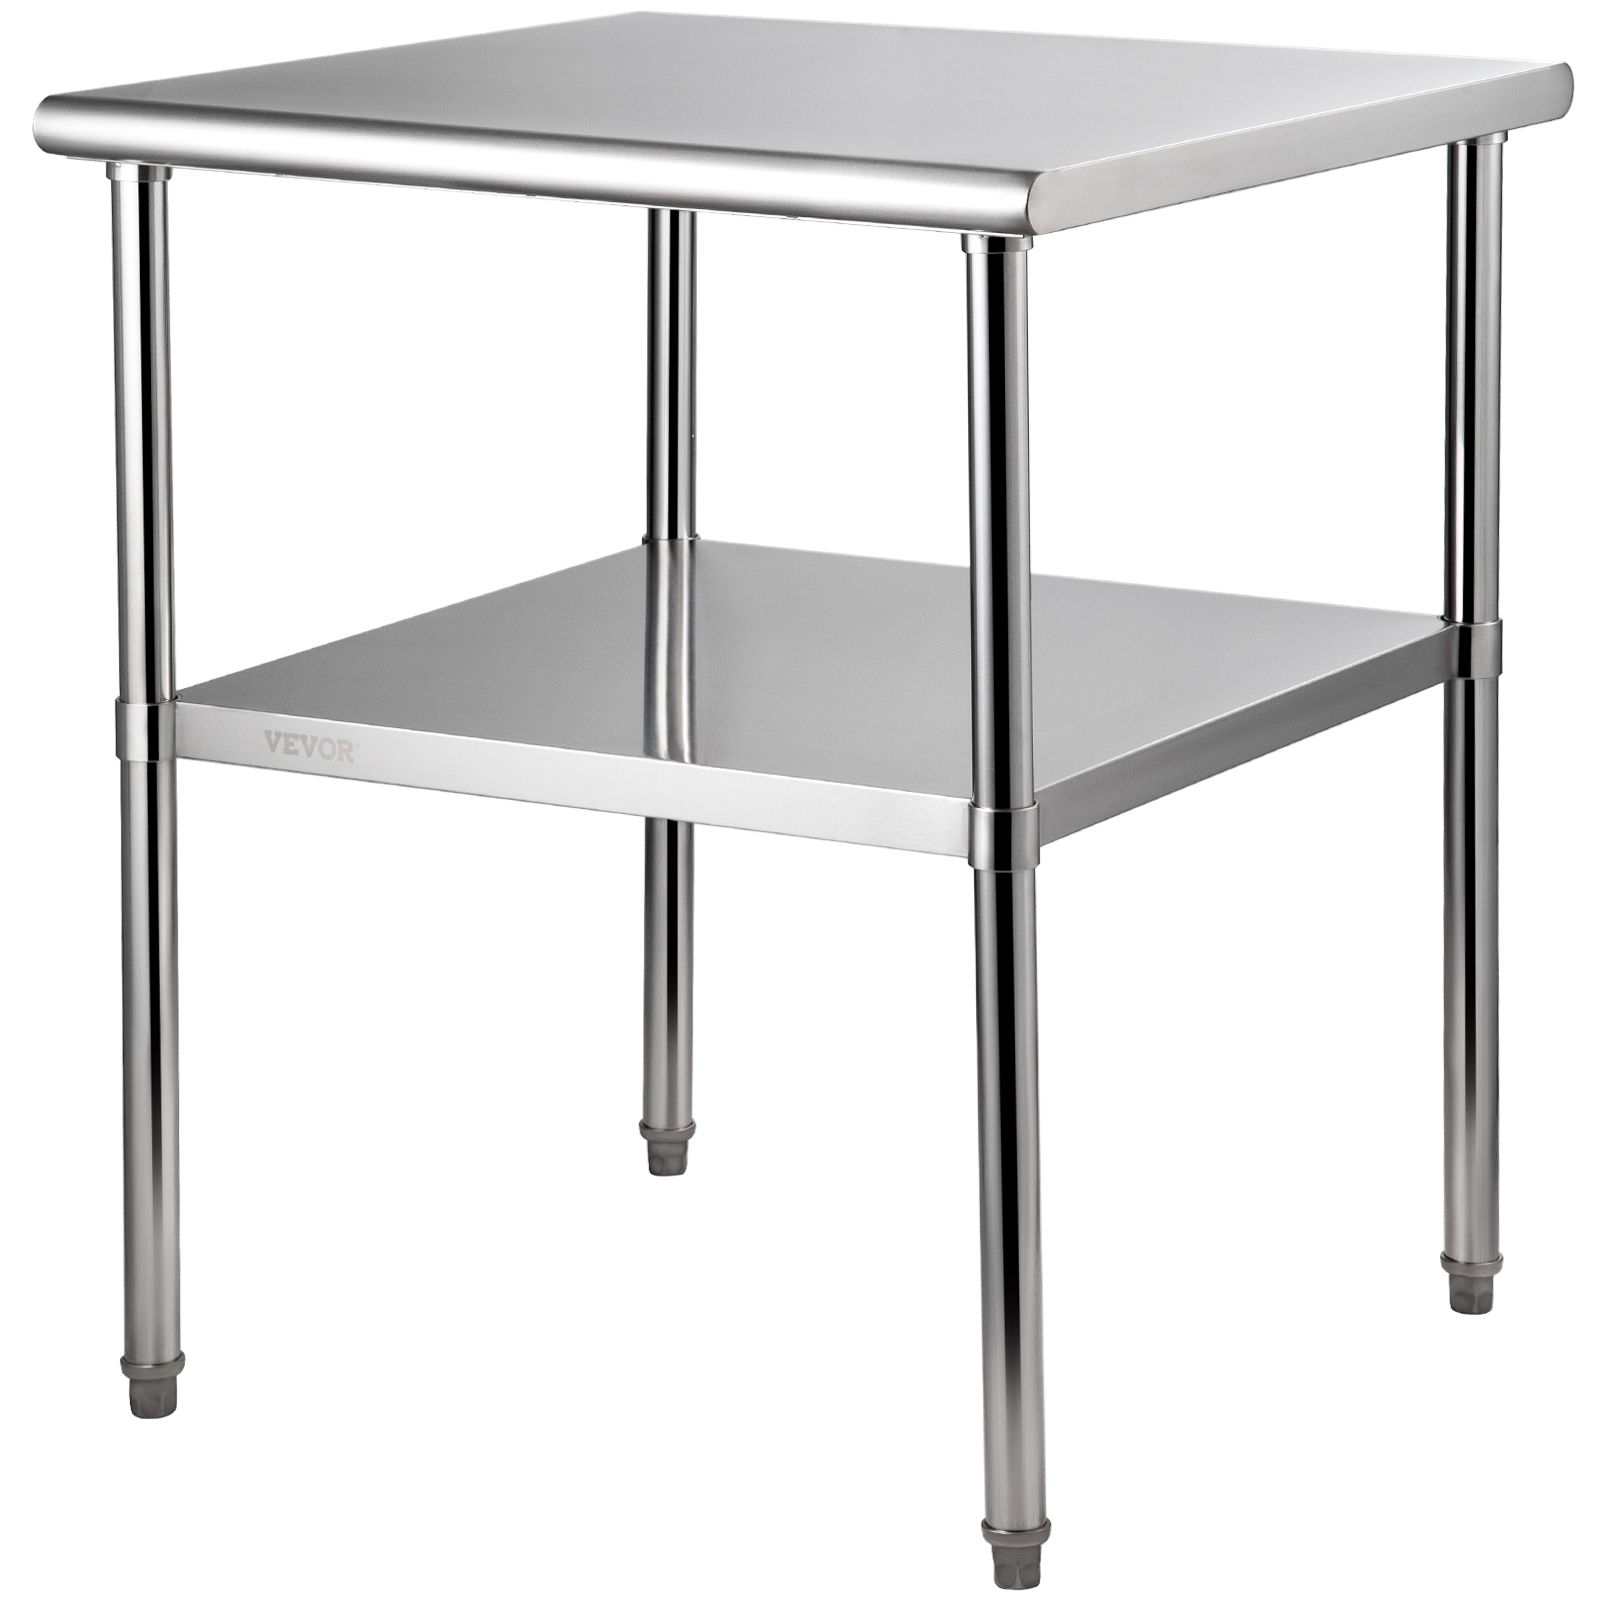 Stainless Steel Work Table for Prep & Work 24 x 60 Inches Heavy Duty Table with Undershelf and Galvanized Legs for Restaurant, Home and Hotel, Silver